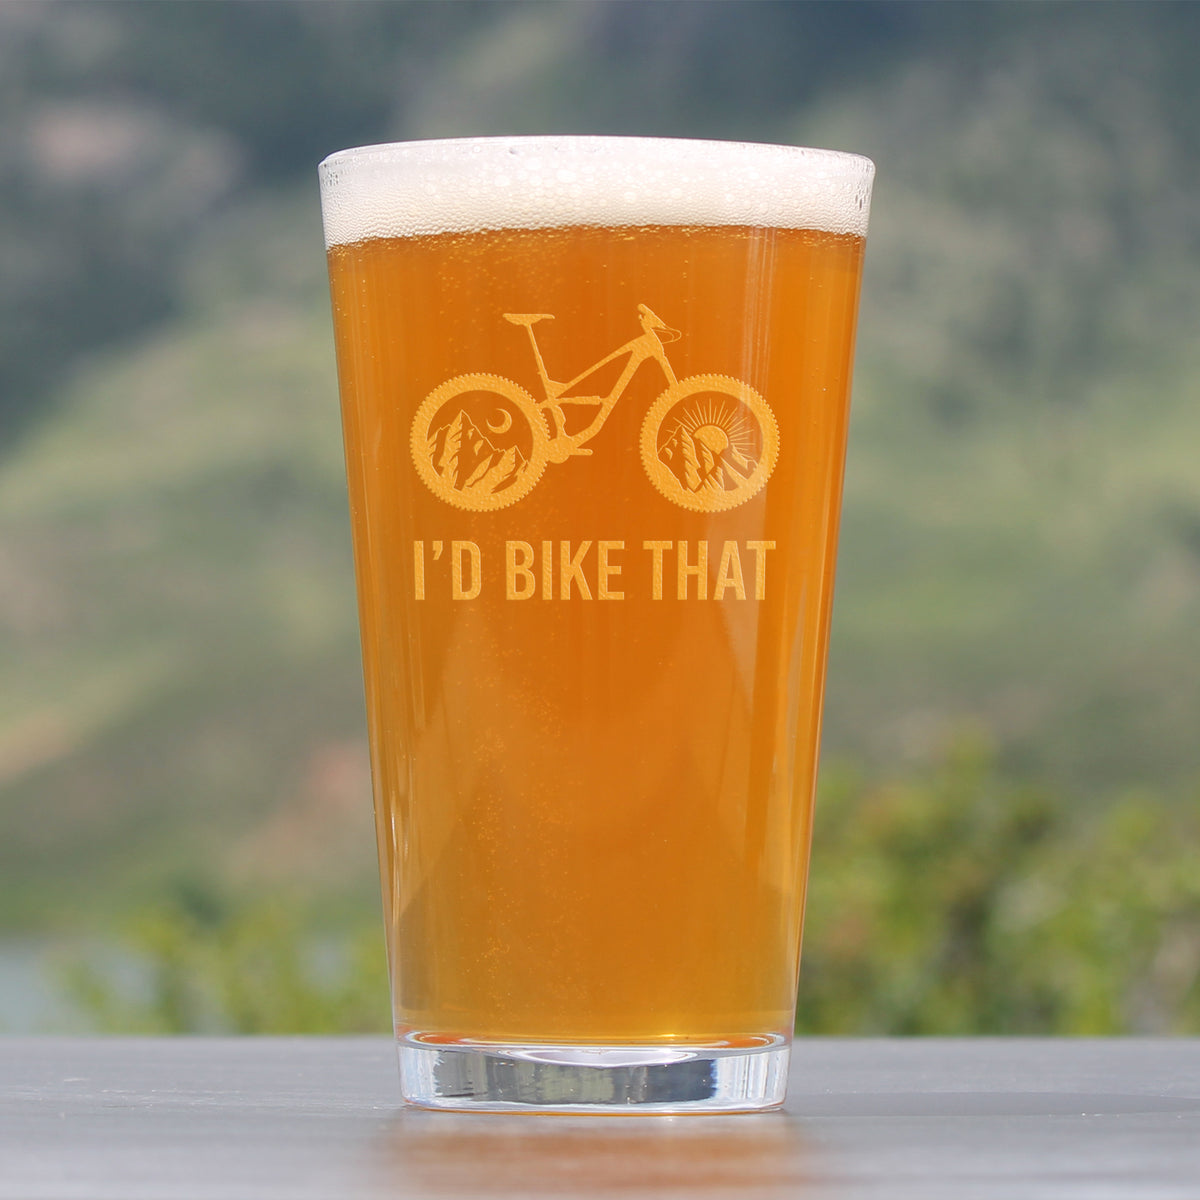 I&#39;d Bike That - Pint Glass for Beer - Cool Bicycle Themed Decor and Gifts for Outdoor Lovers - 16 oz Glasses